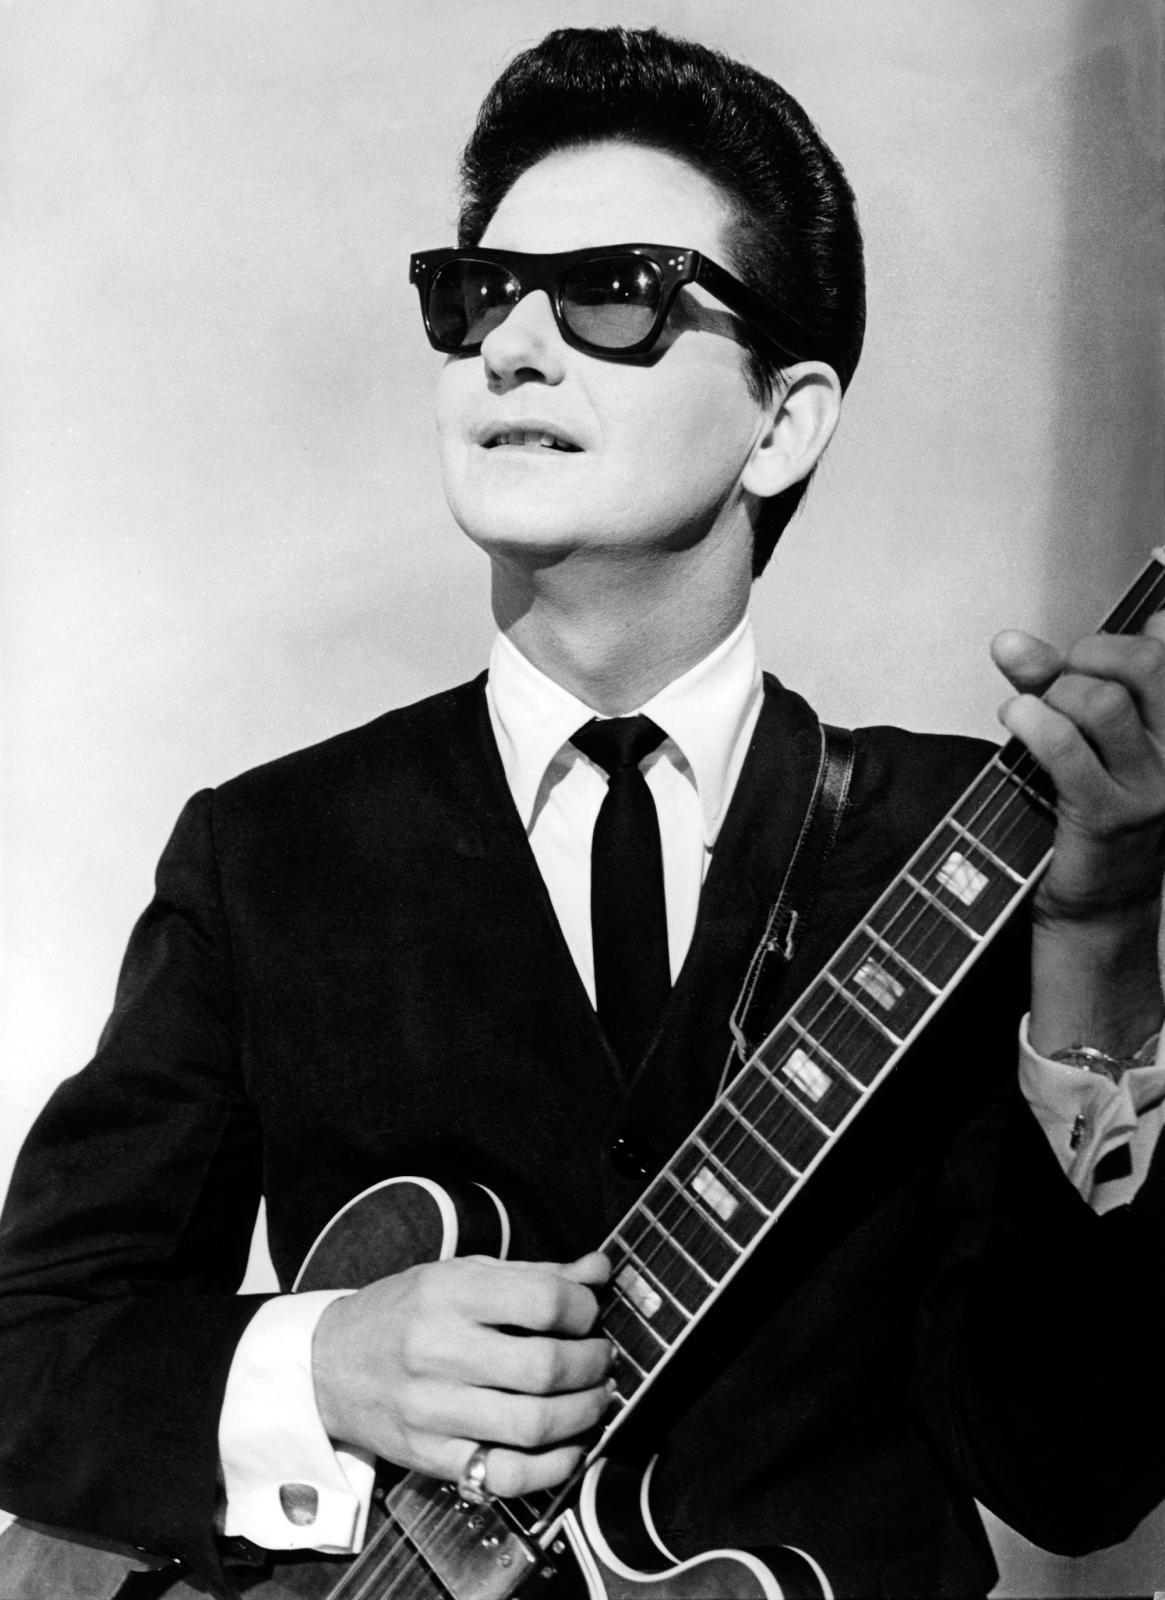 Roy orbison discography